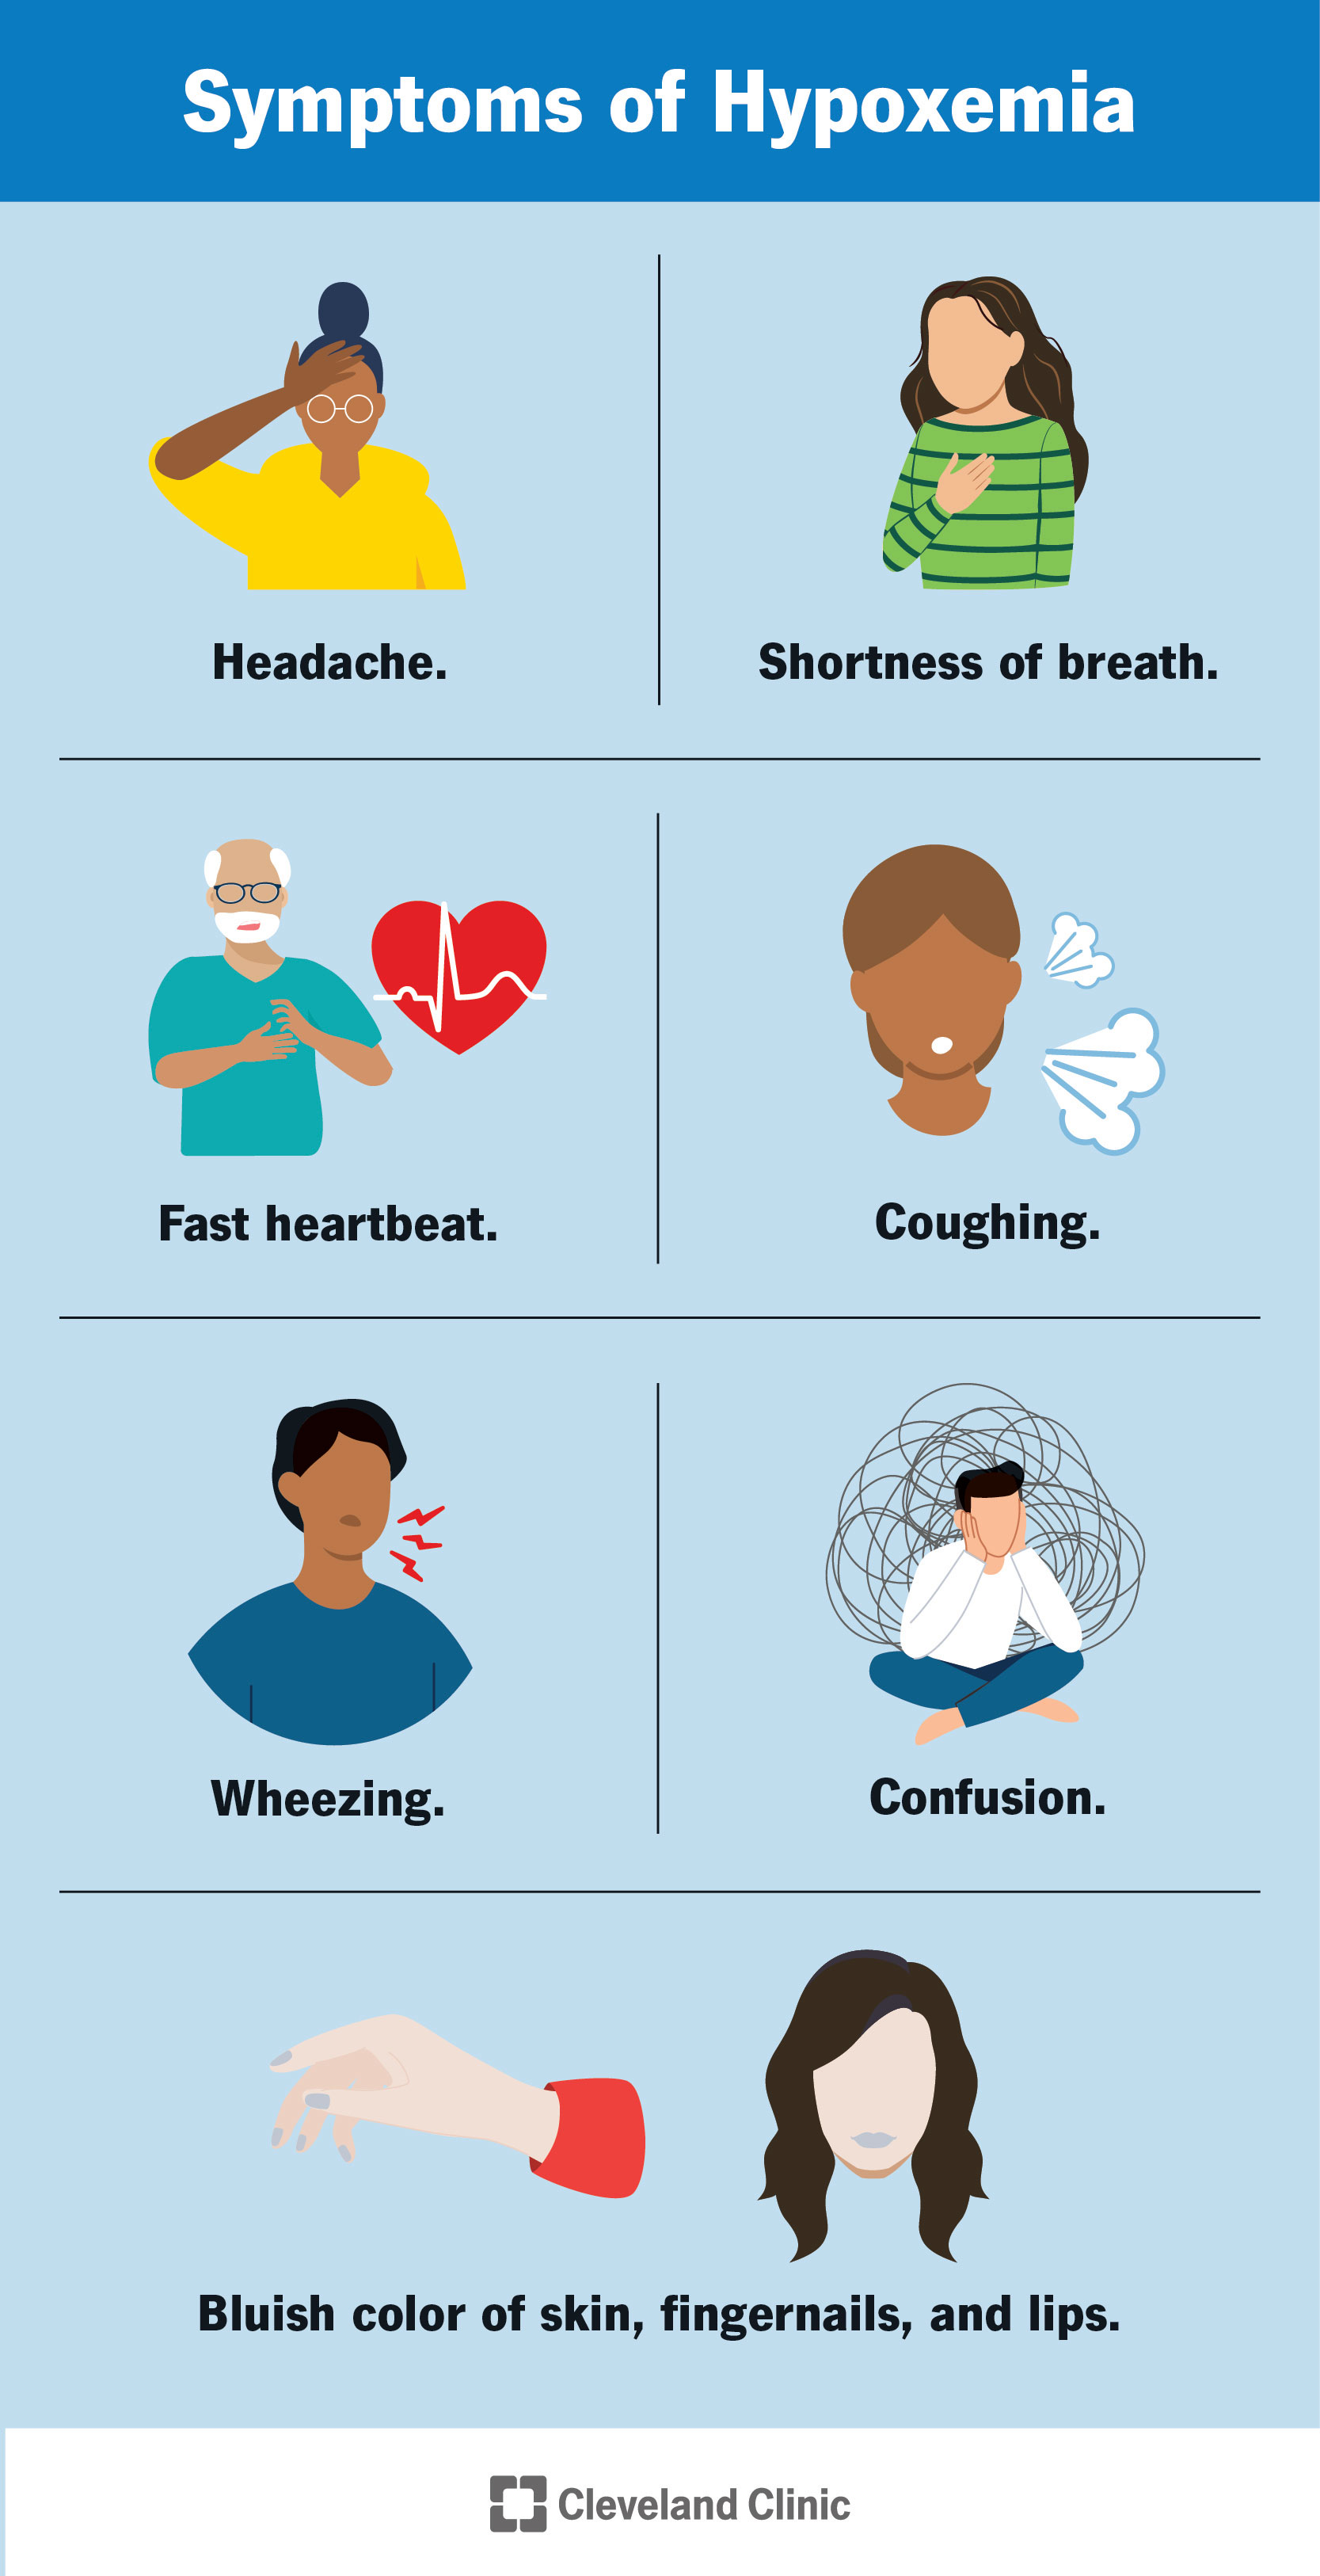 Symptoms of hypoxemia include headache, shortness of breath, fast heartbeat, coughing, confusion, bluish skin and more.